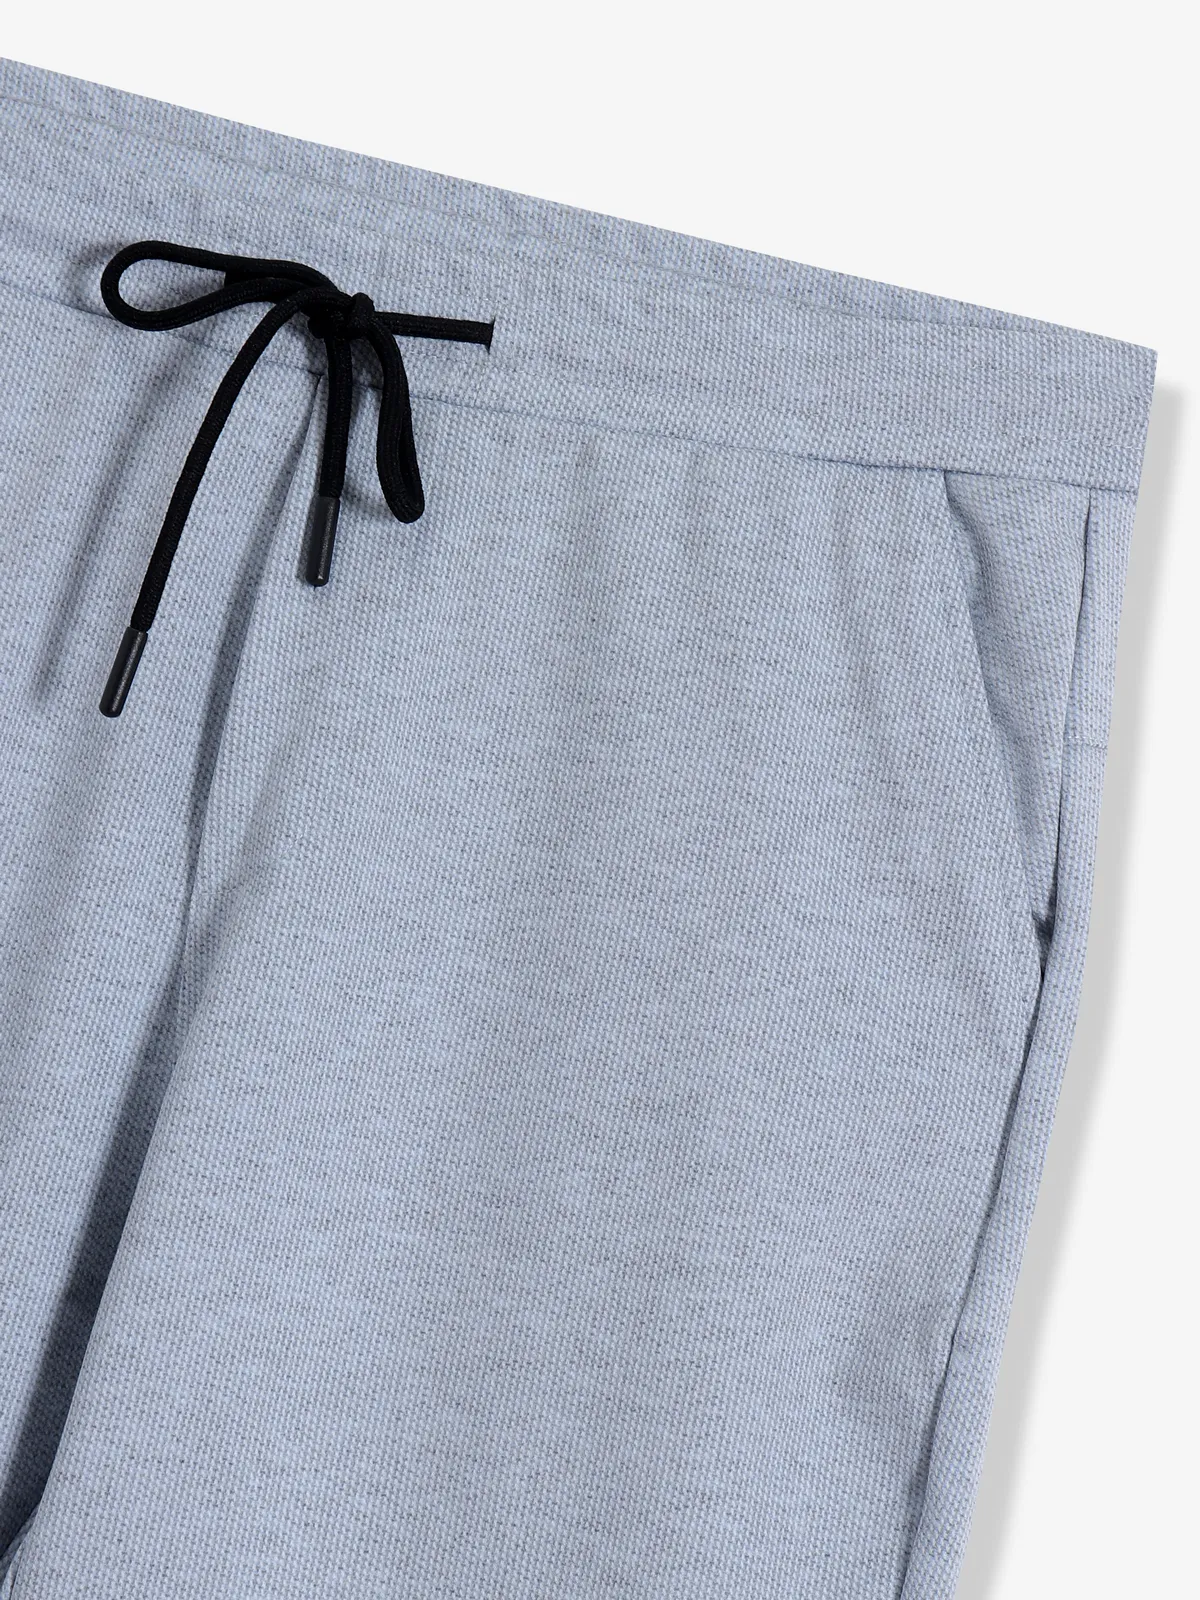 GS78 light grey solid track pant in cotton